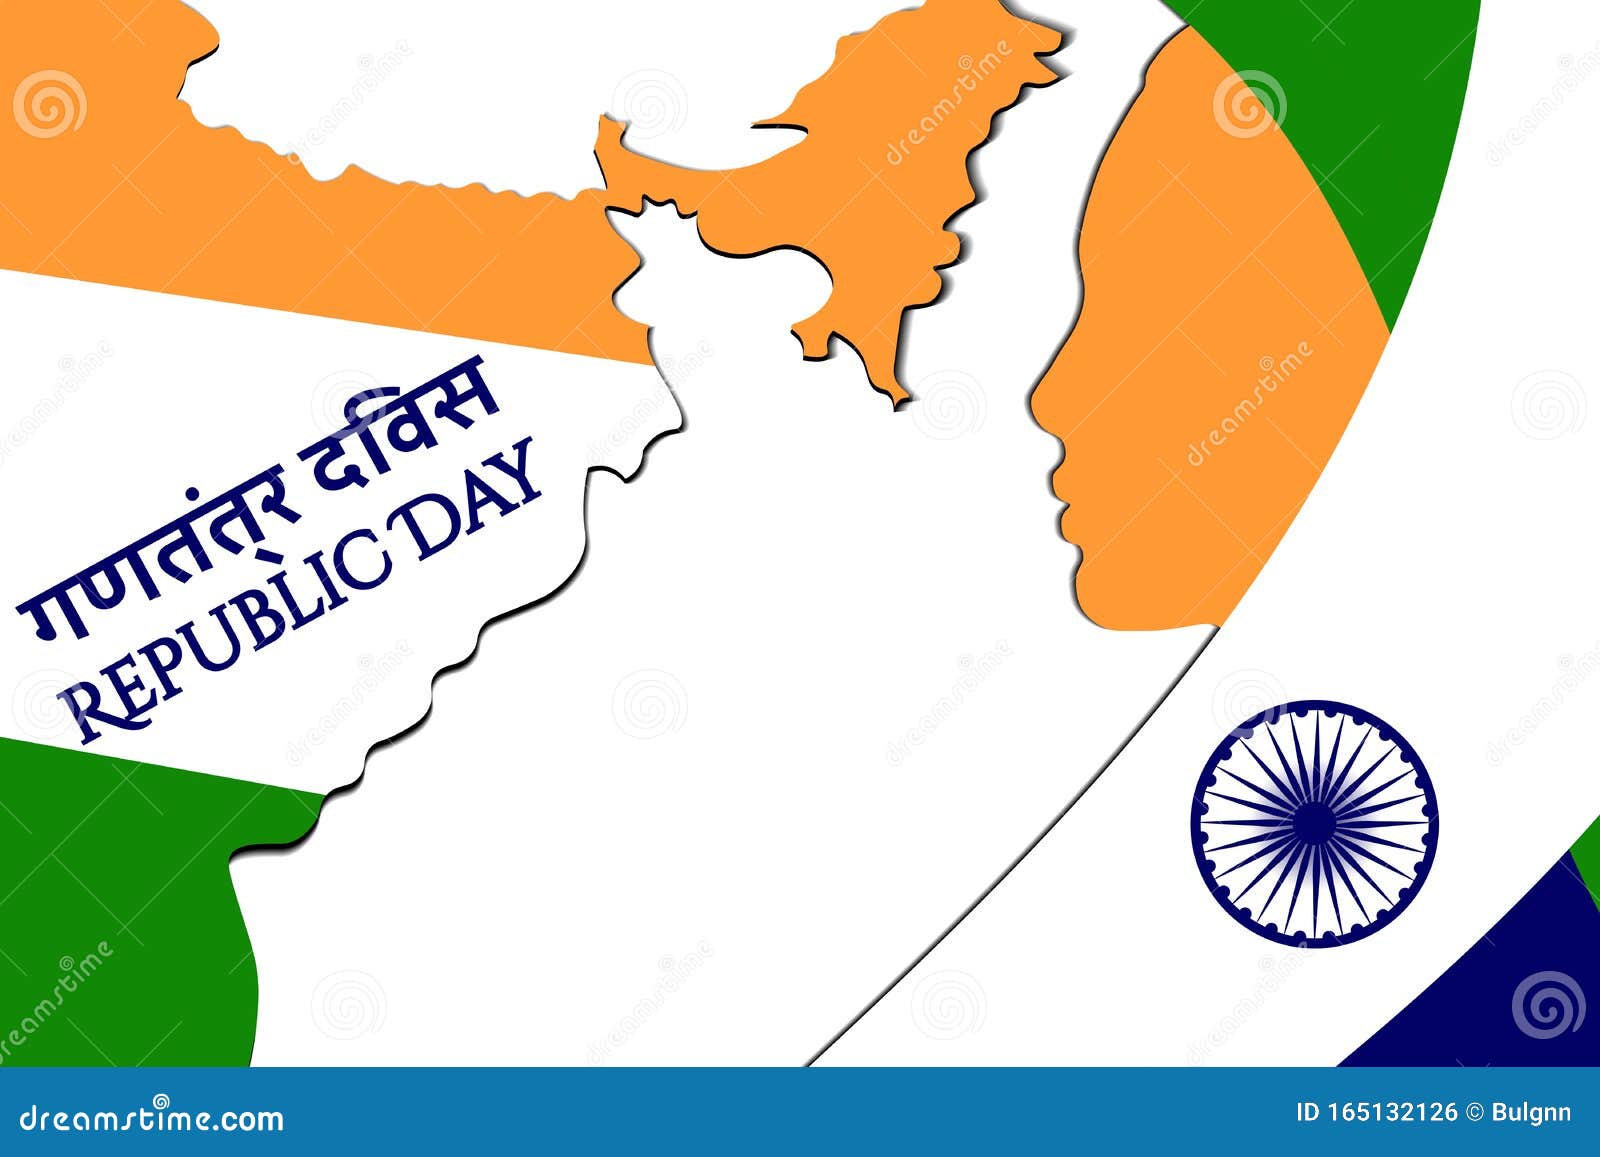 Background For Indian Holiday Republic Day With Inscription